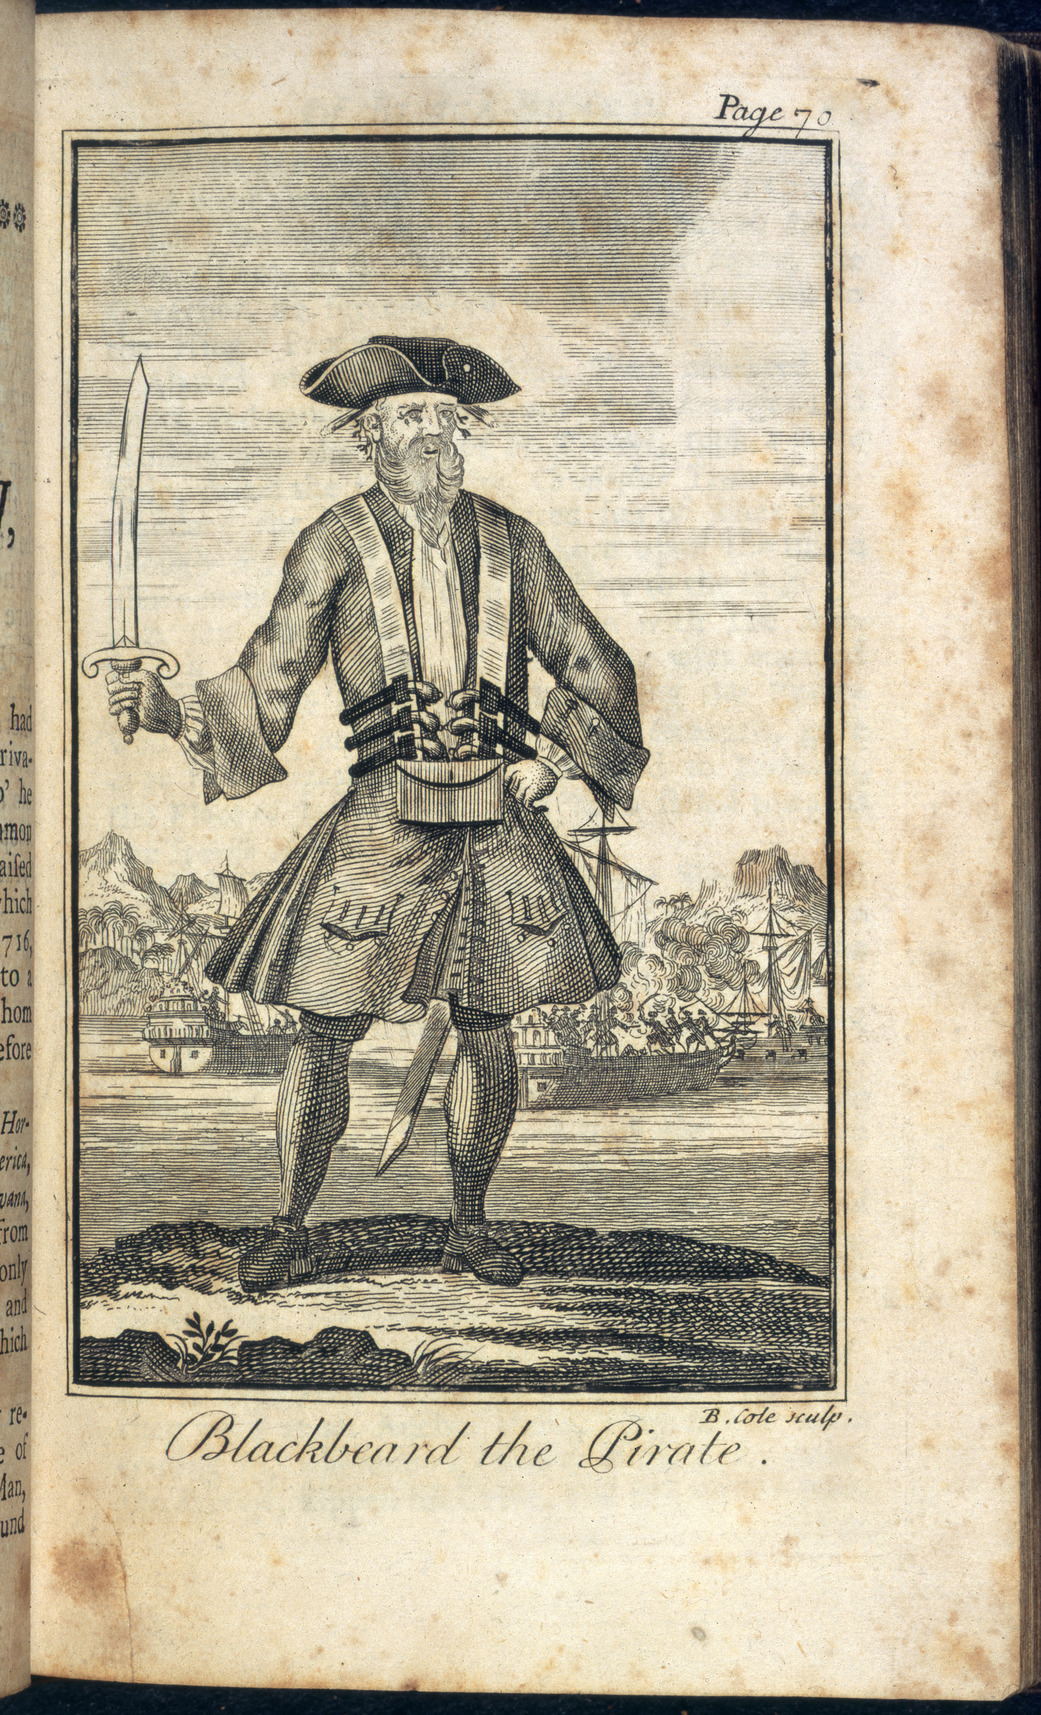 A sketch of the infamous pirate, Blackbeard who was finally taken down in the Outer Banks